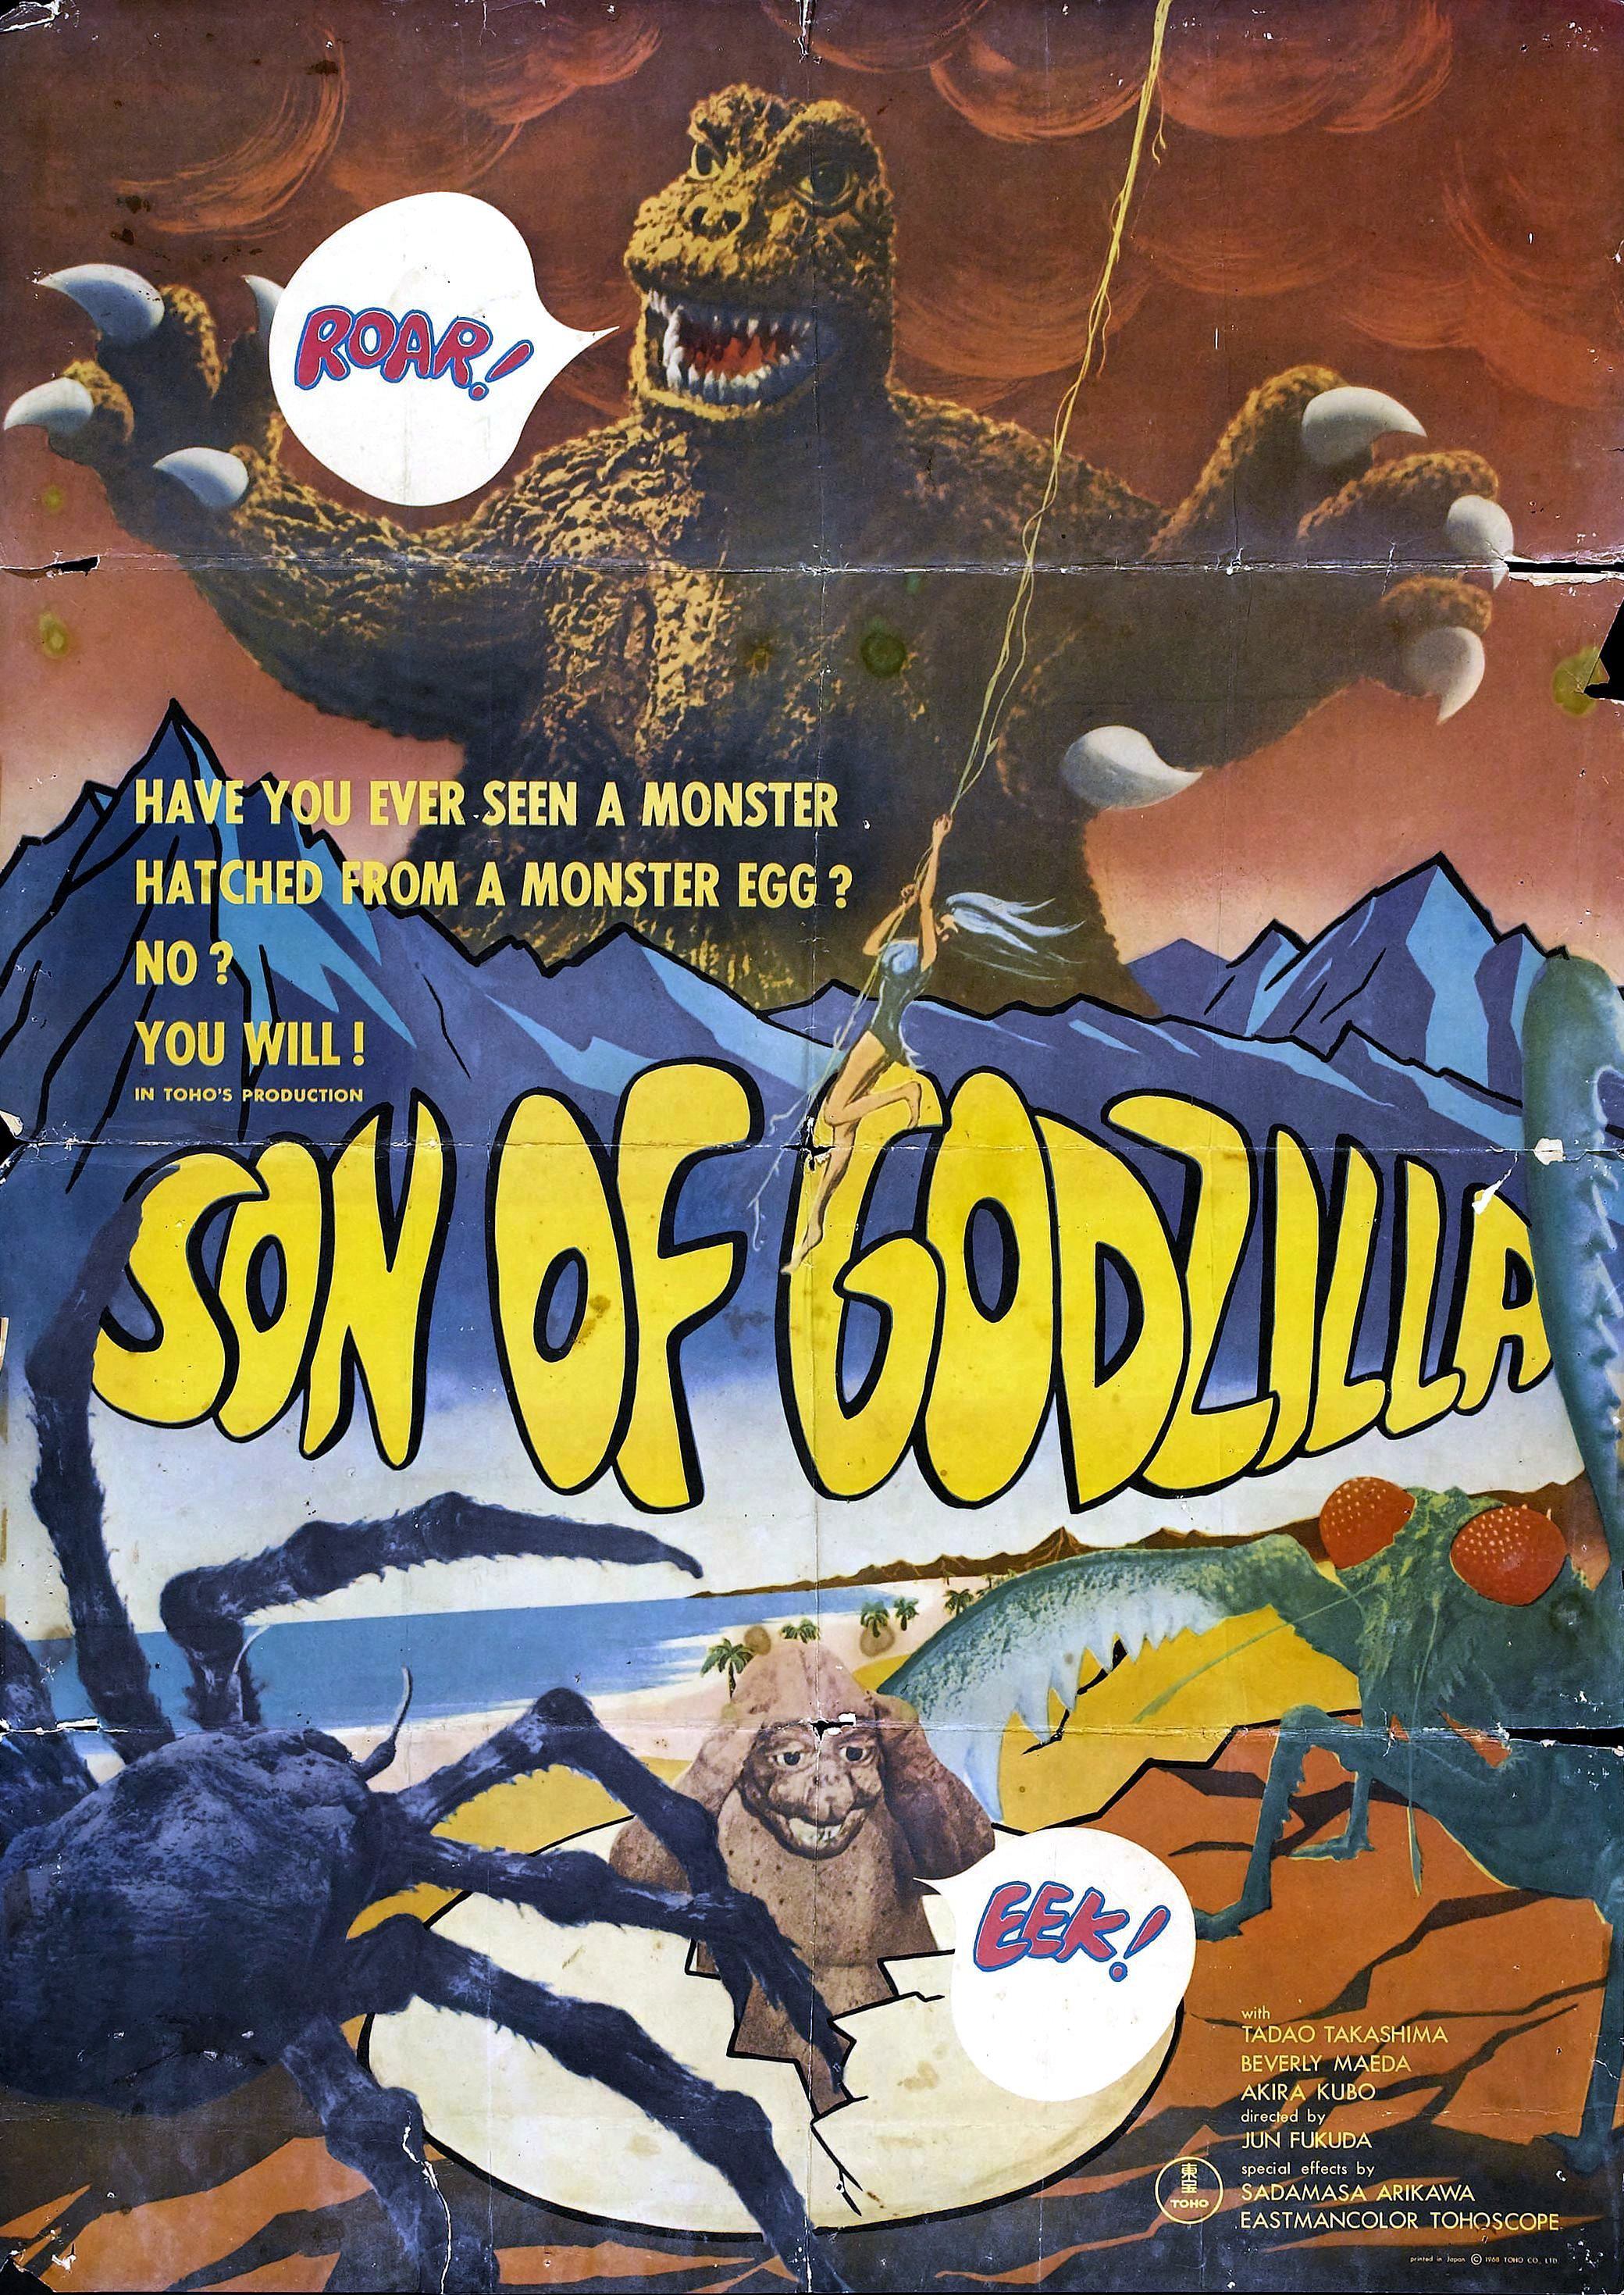 son of godzilla poster - Have You Ever Seen A Monster Hatched From A Monster Egg ? No? You Will! Een Of Godina